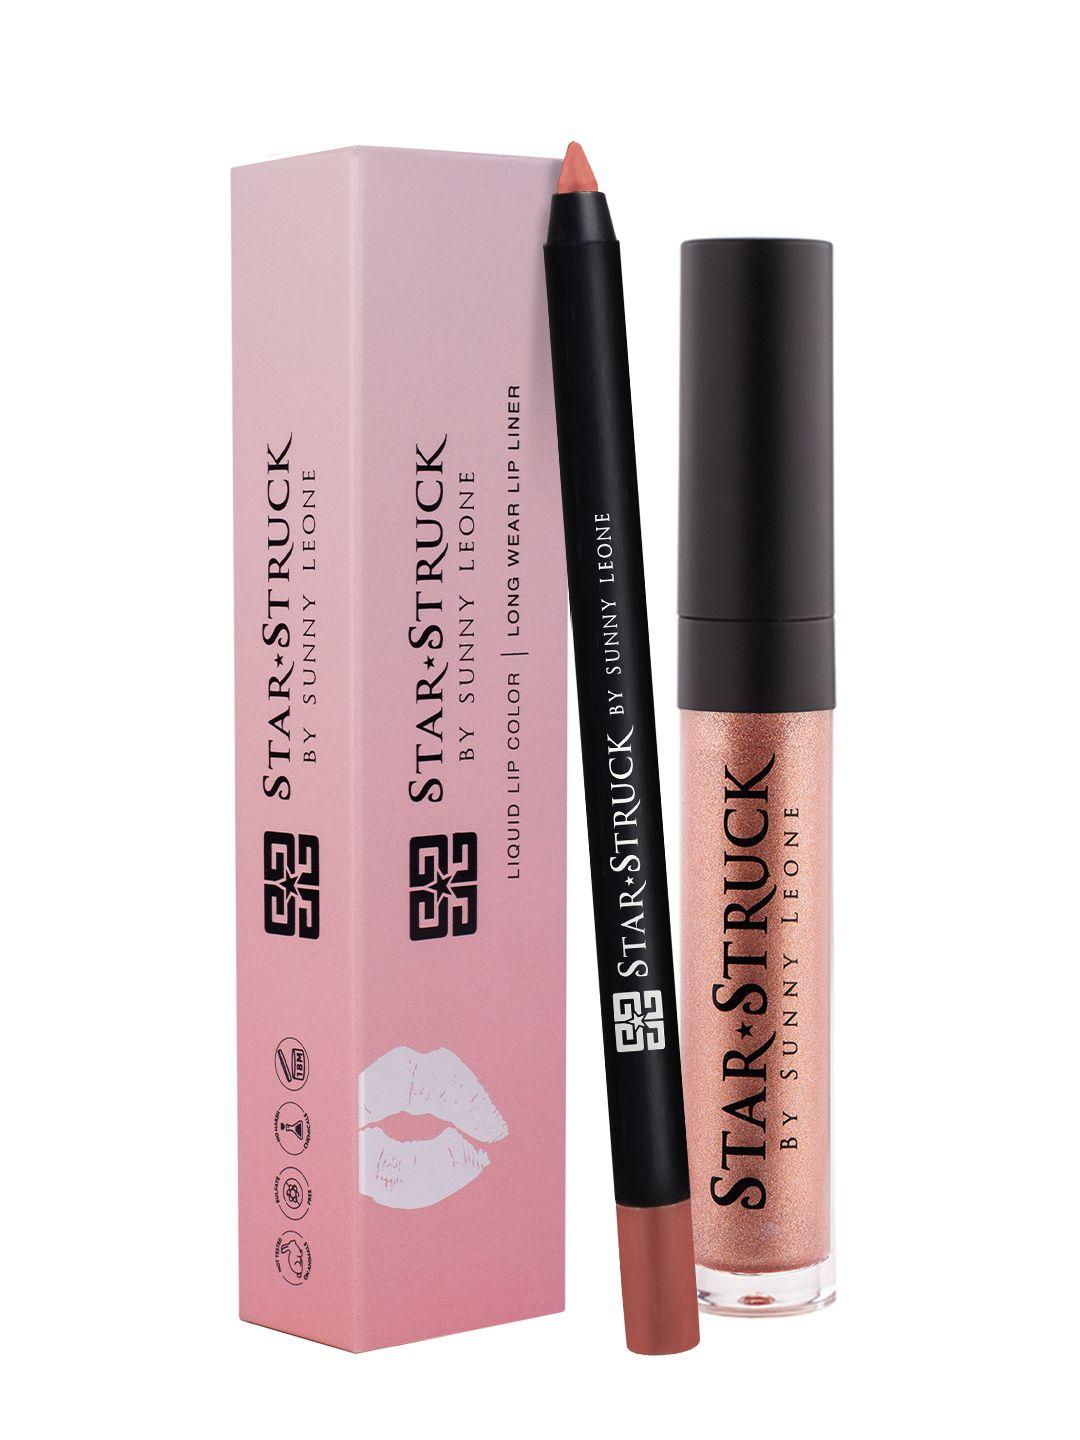 star struck by sunny leone pink pack of lip gloss & liner - champagne sparkle